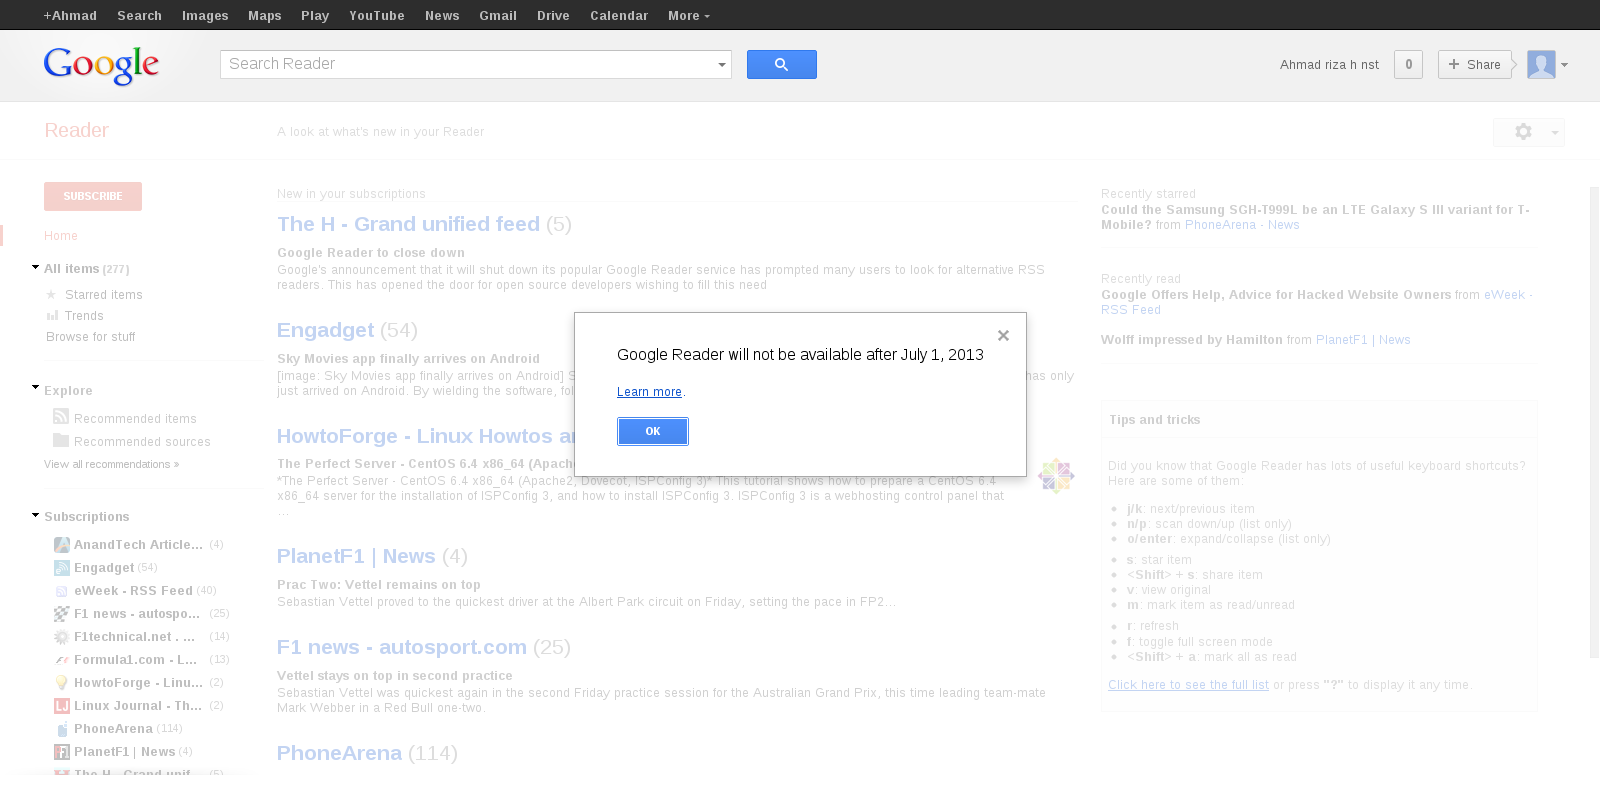 Google Reader will not be available after july 1, 2013